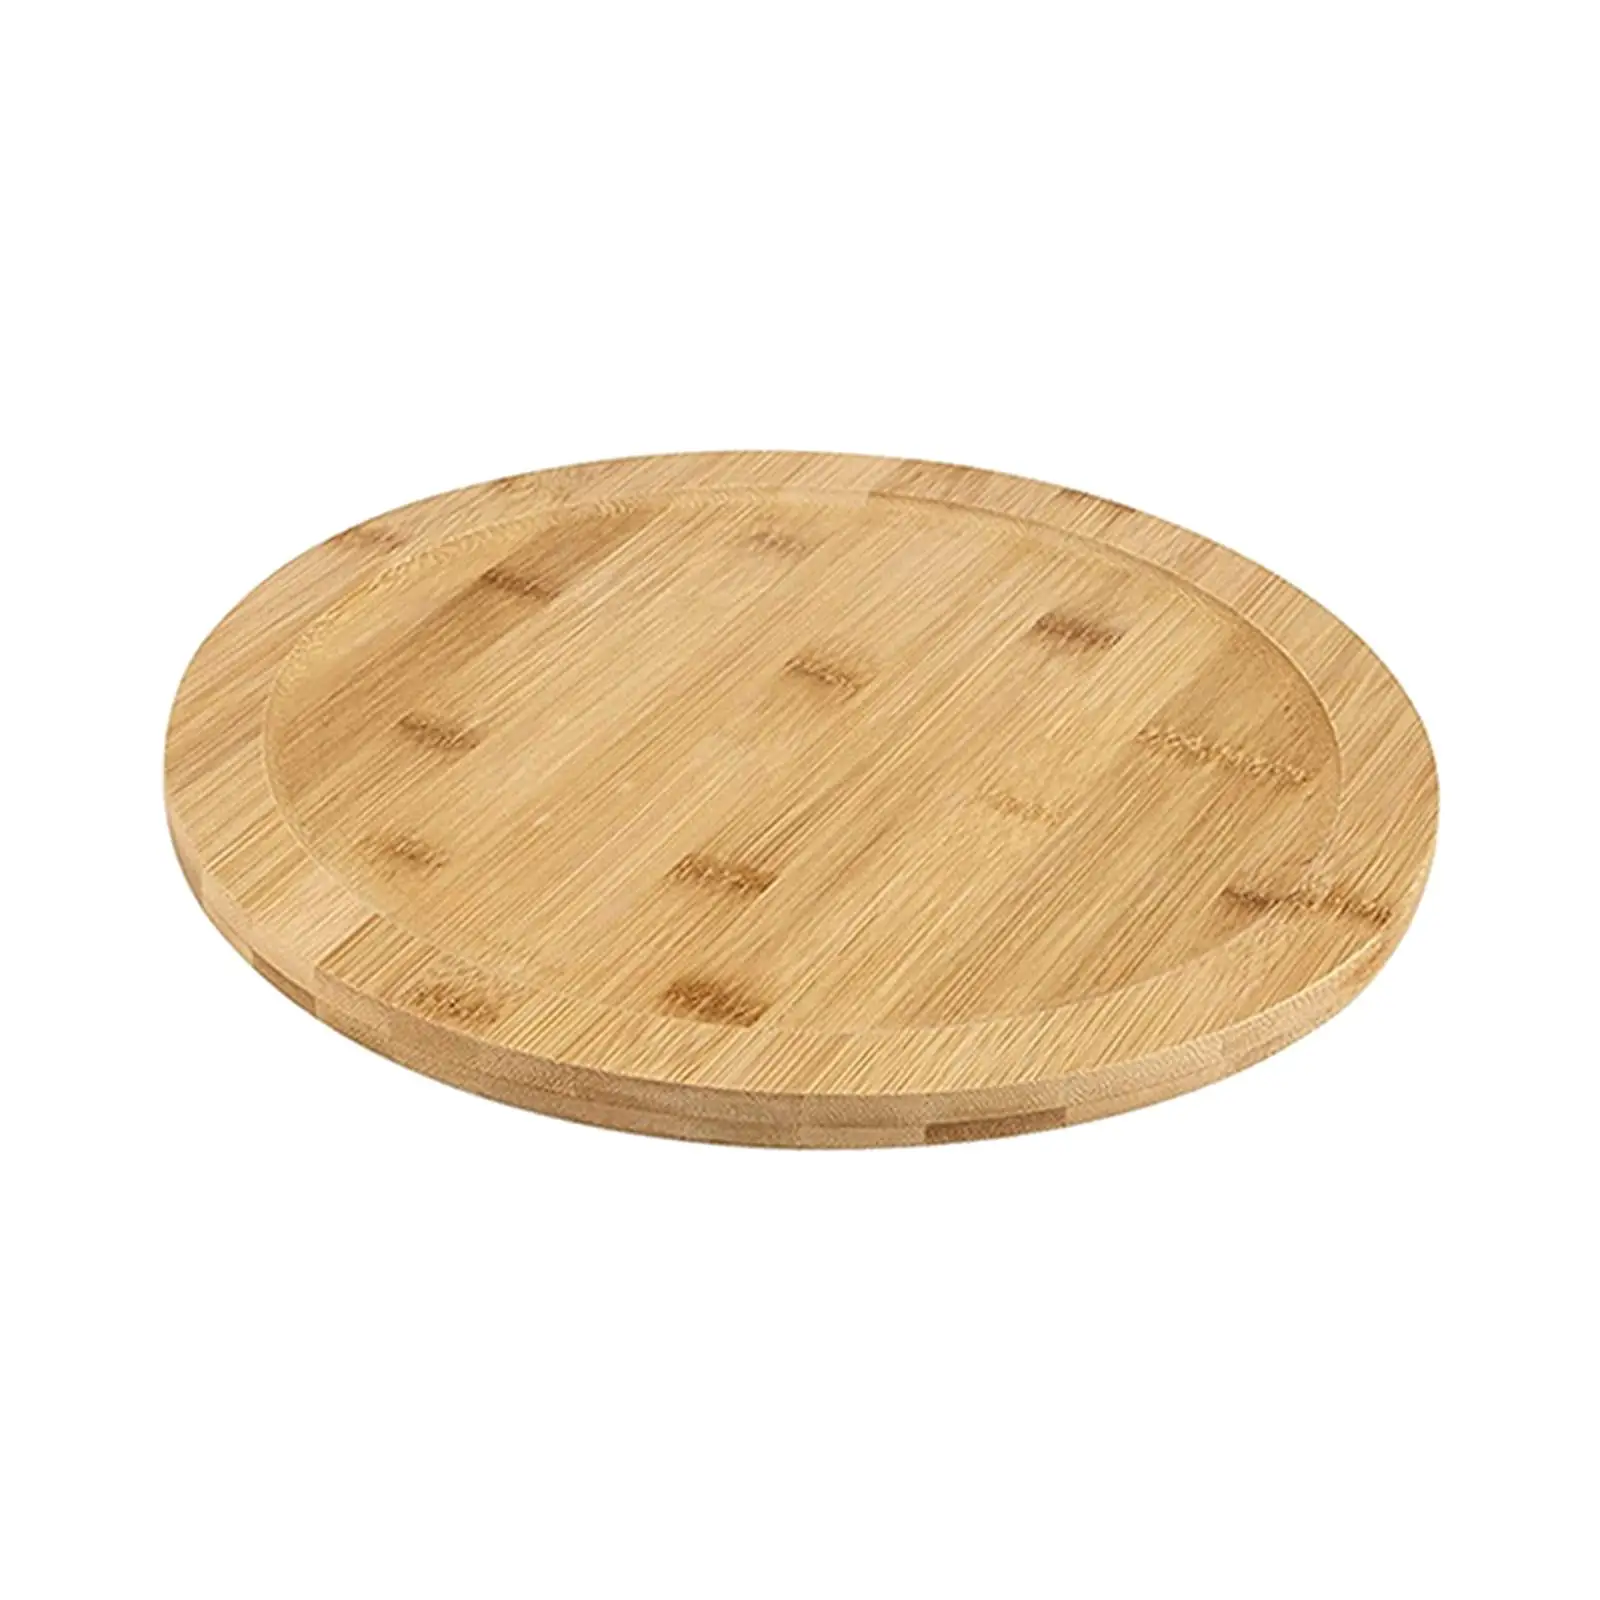 Wooden Rotating Dining Plate Rotating Board Multipurpose Serving Tray Wooden Turntable for Home Cabinet Kitchen Dining Table